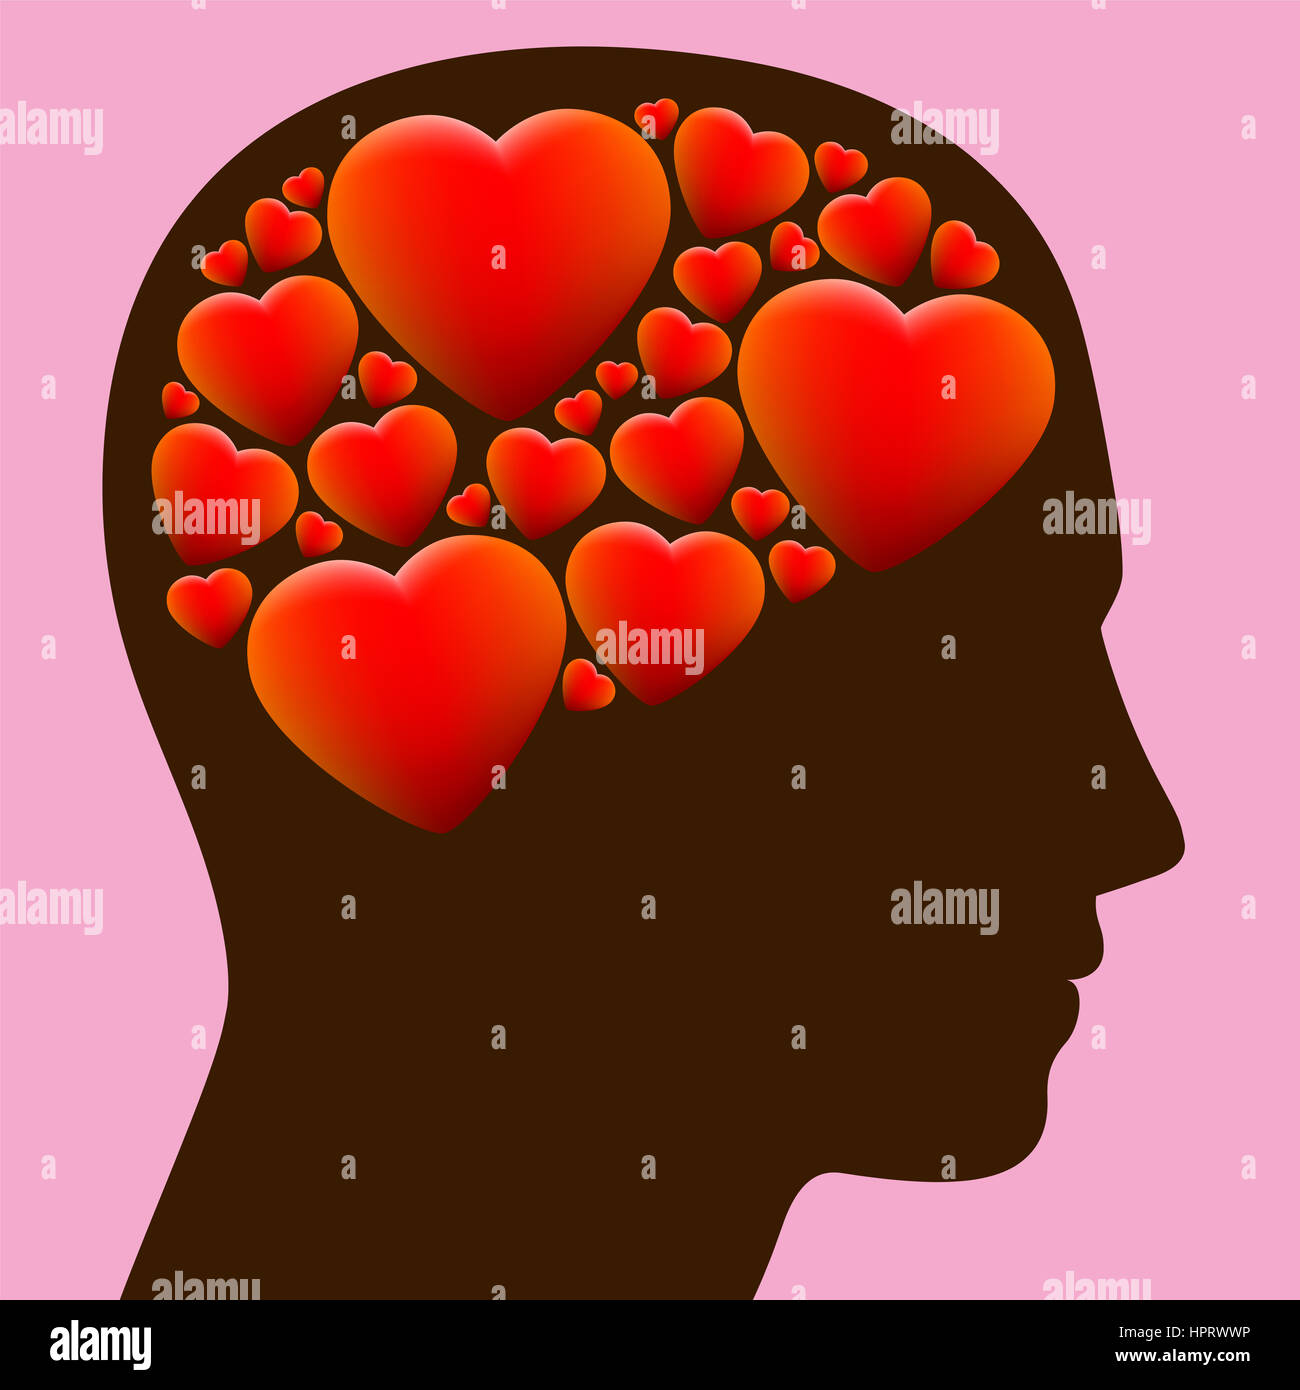 Lovestruck - head full with hearts instead of brain - illustration on rosy background. Stock Photo